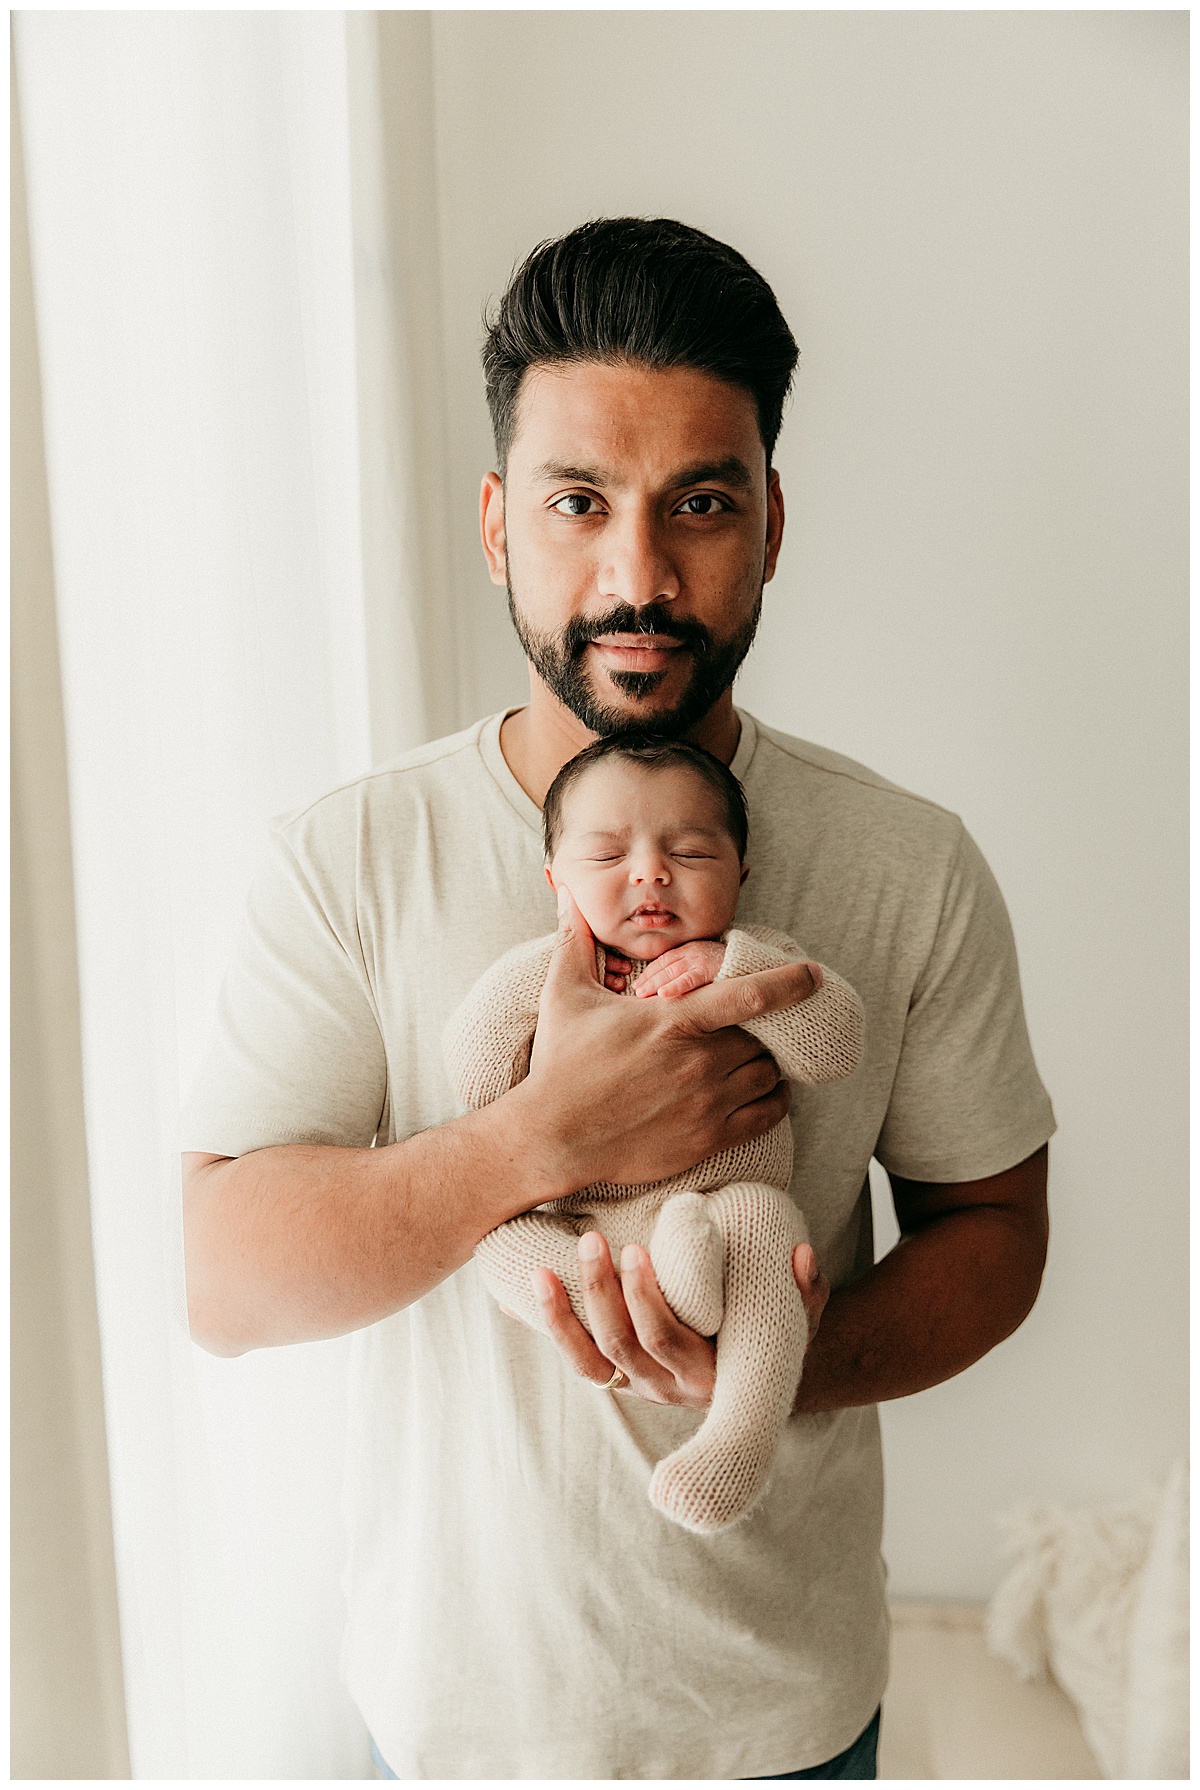 Dad holds baby close for a Successful Newborn Session With Your Toddler